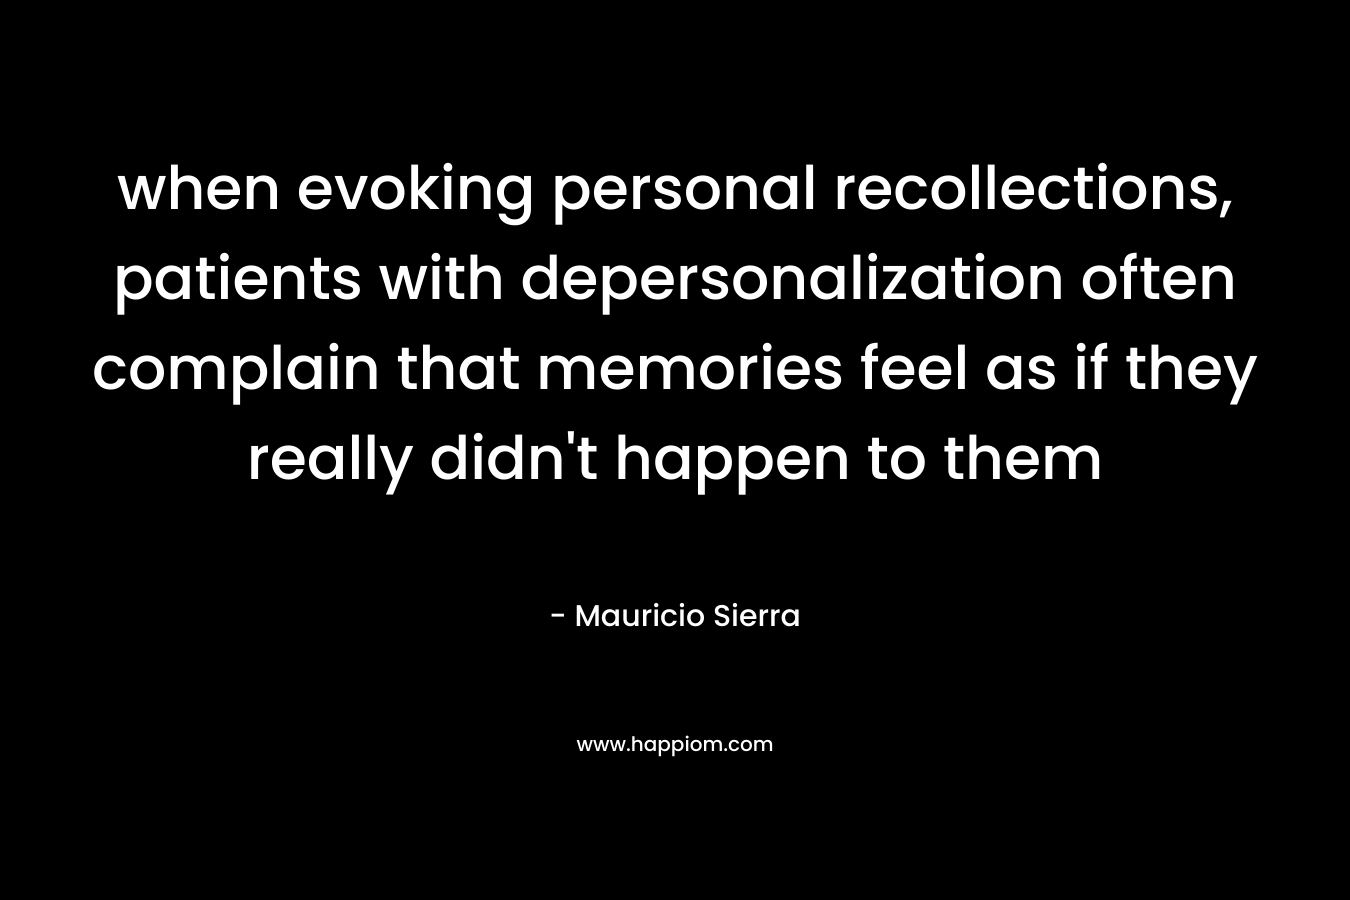 when evoking personal recollections, patients with depersonalization often complain that memories feel as if they really didn’t happen to them – Mauricio Sierra